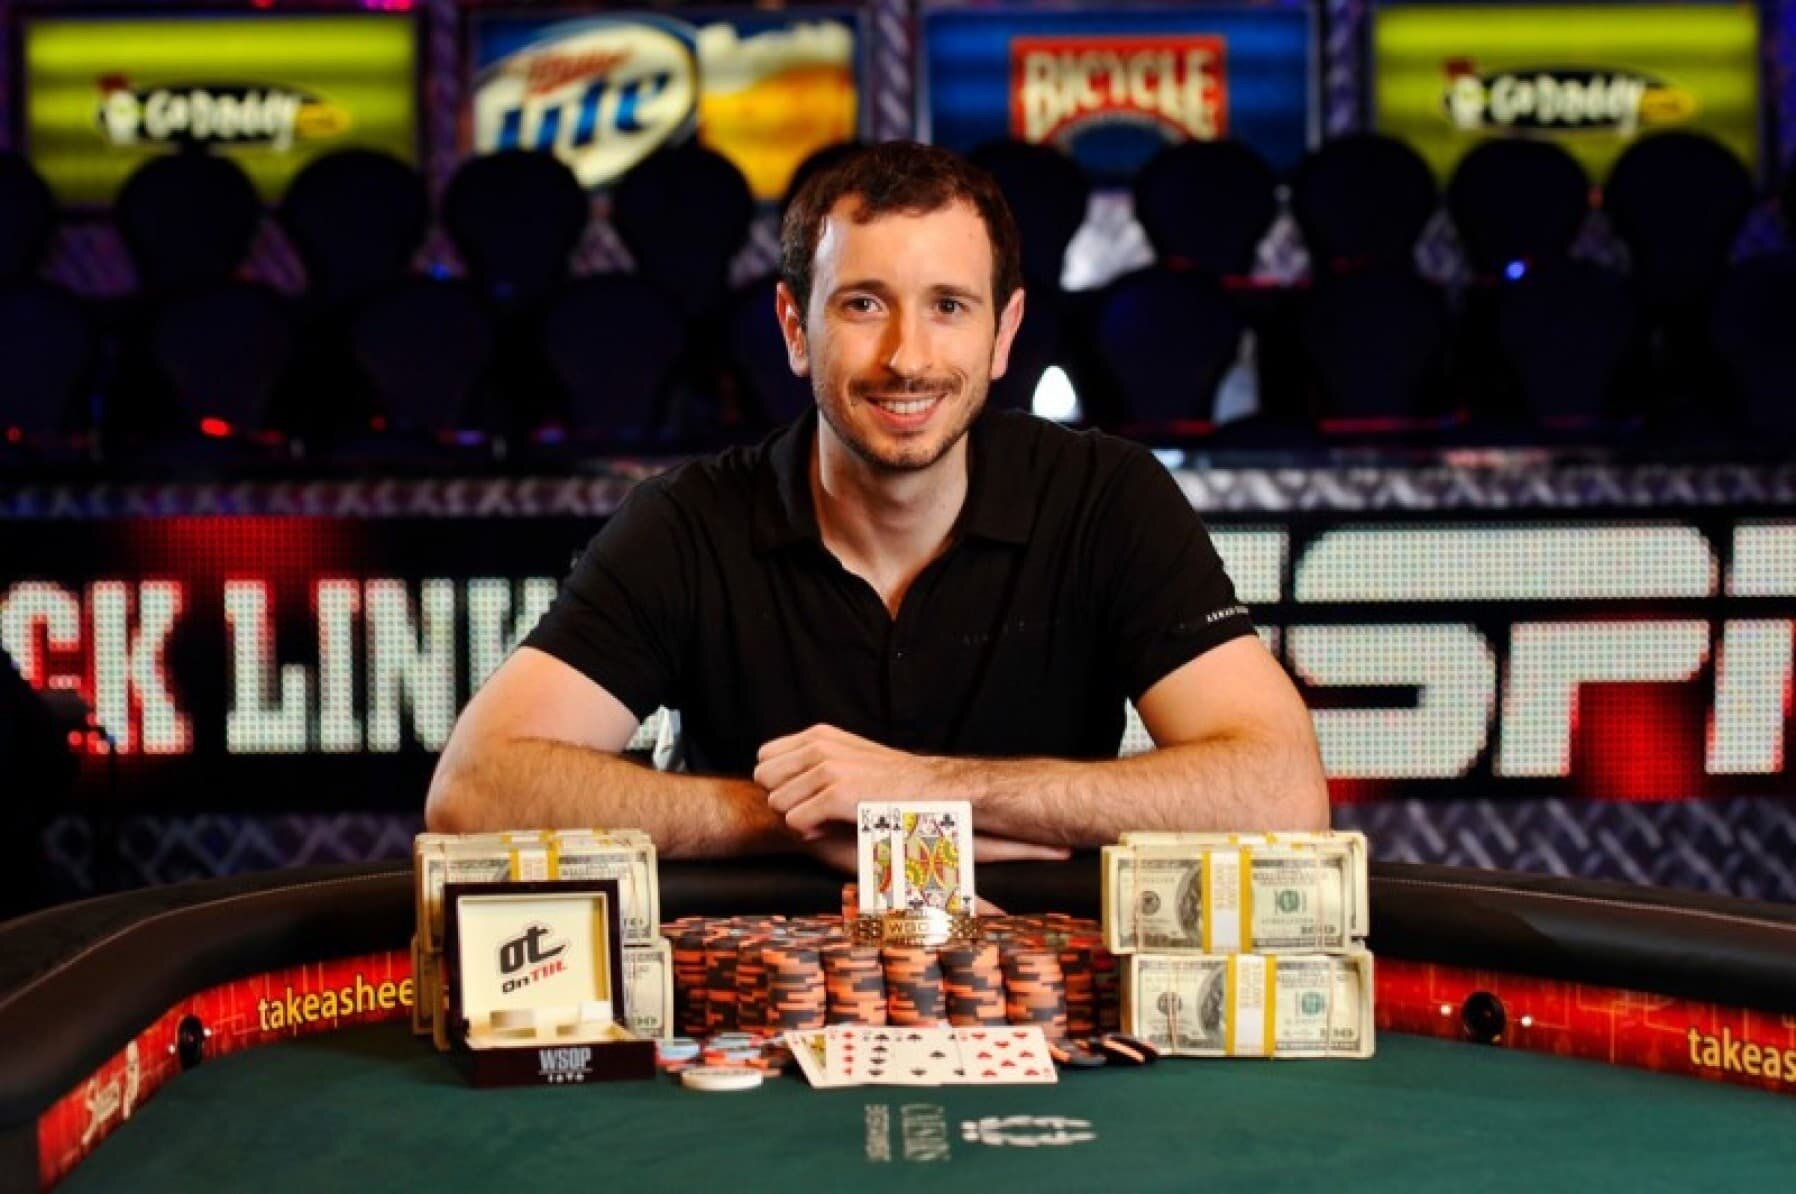 Brian Rast is th Californian poker player with the most live MTT winnings